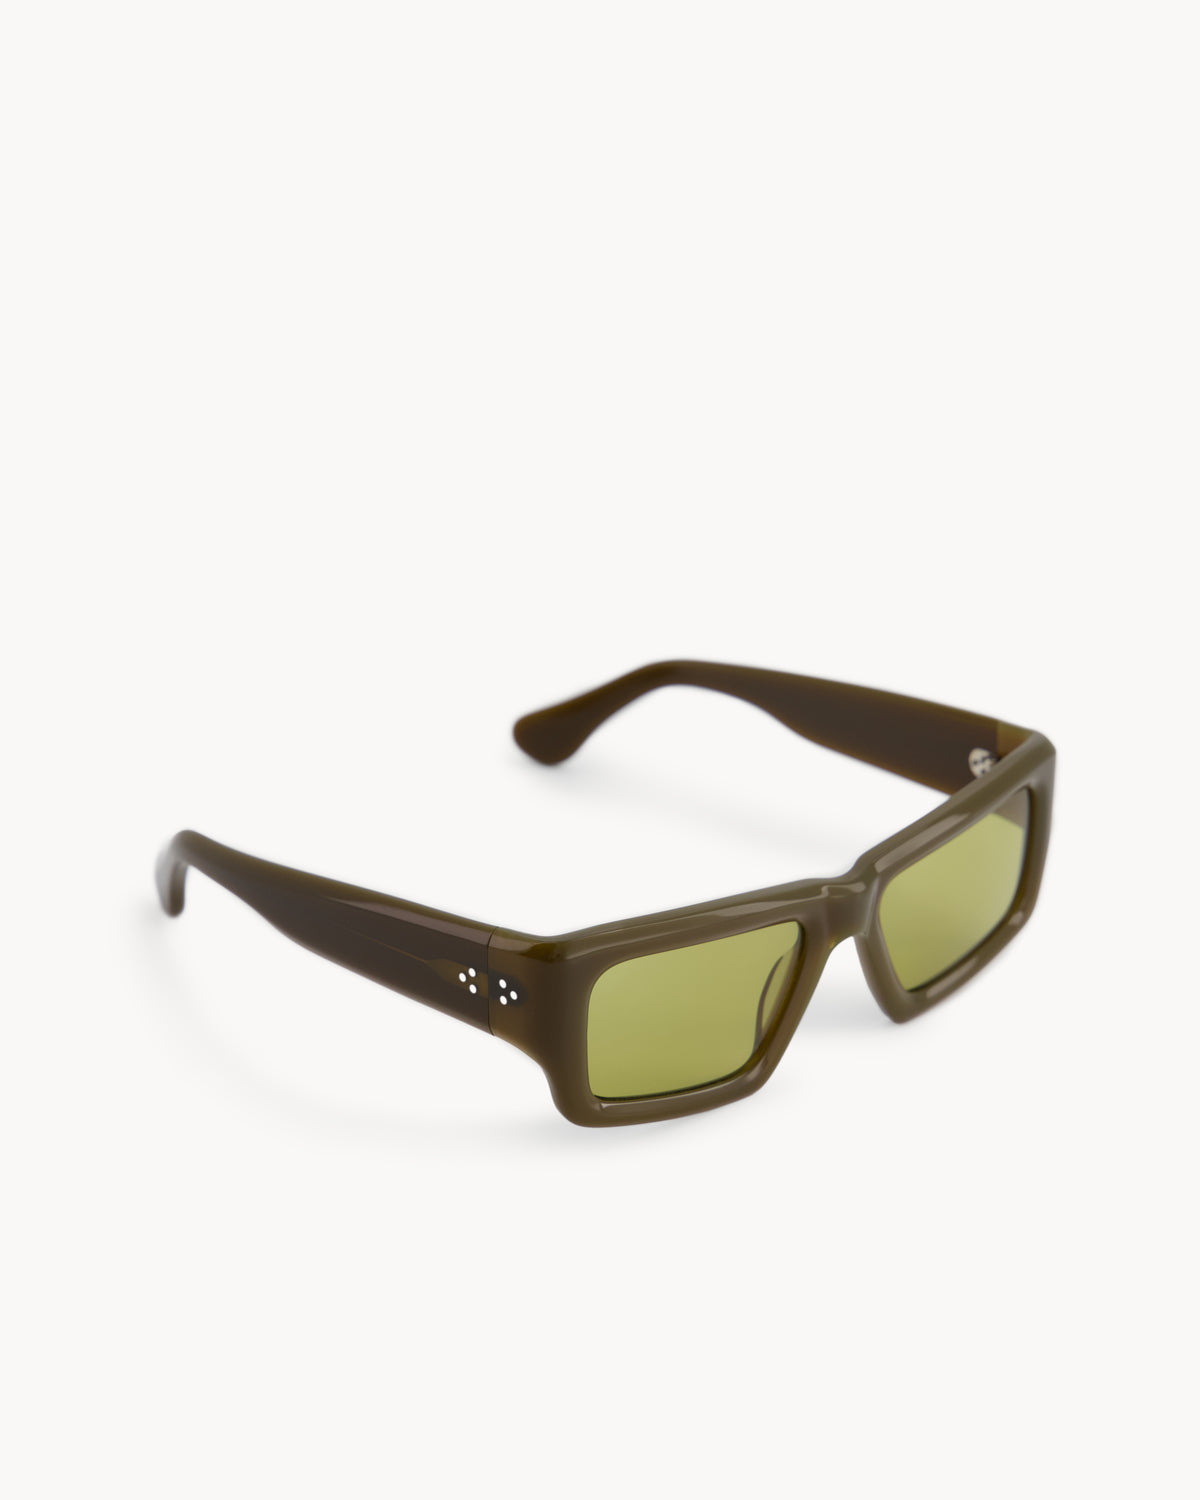 Port Tanger Sabea Sunglasses in Zaytun Acetate and Warm Olive Lenses 2